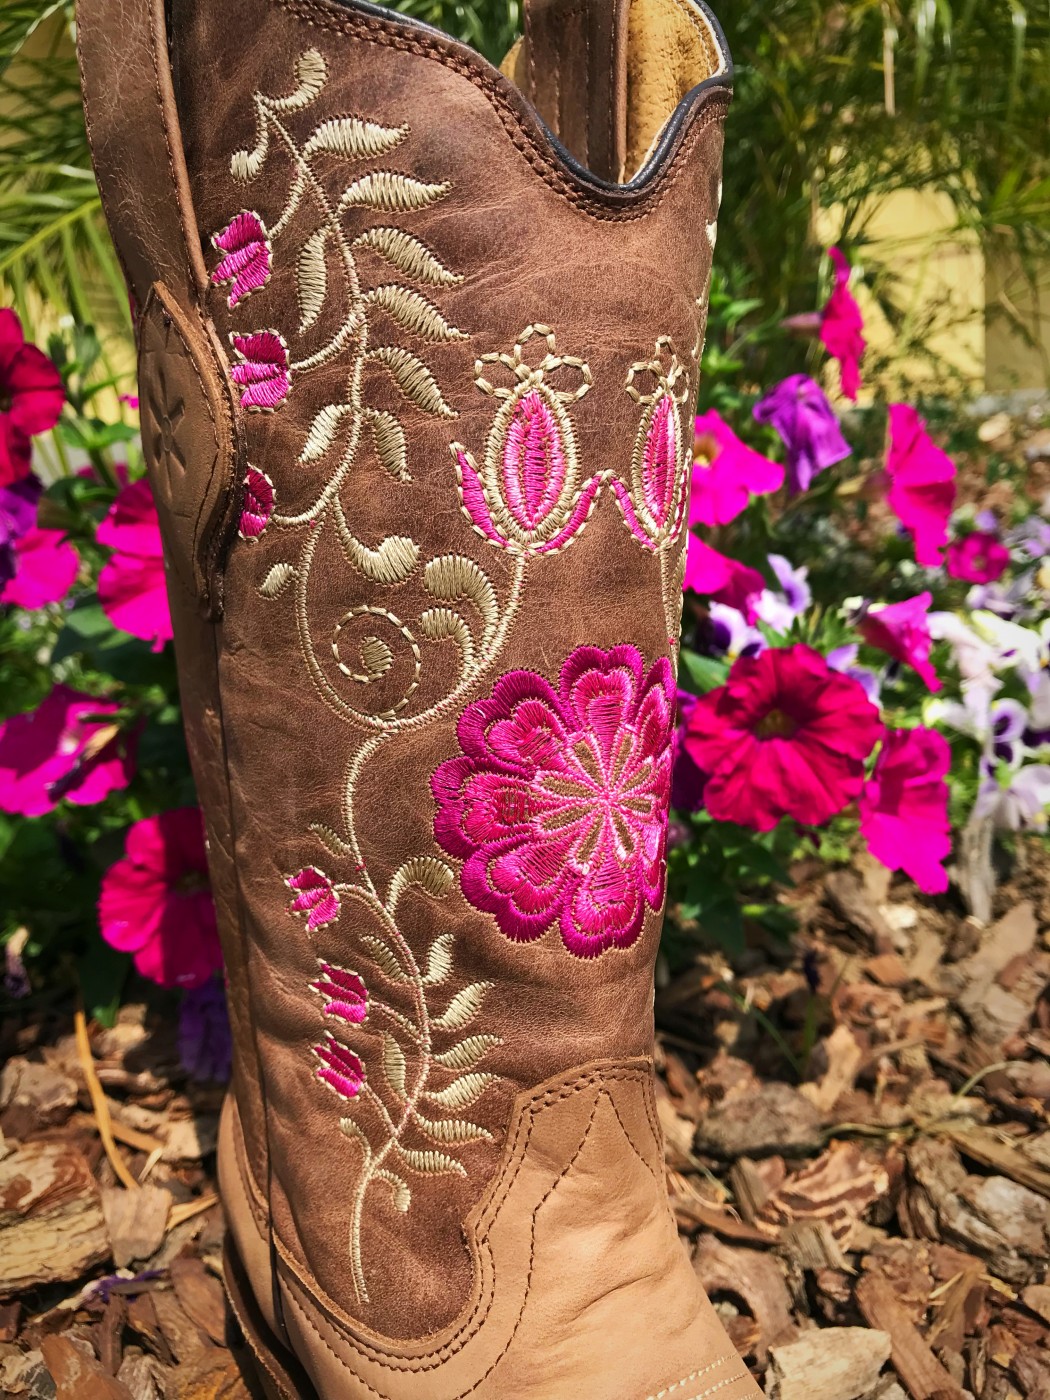 women's floral western boots